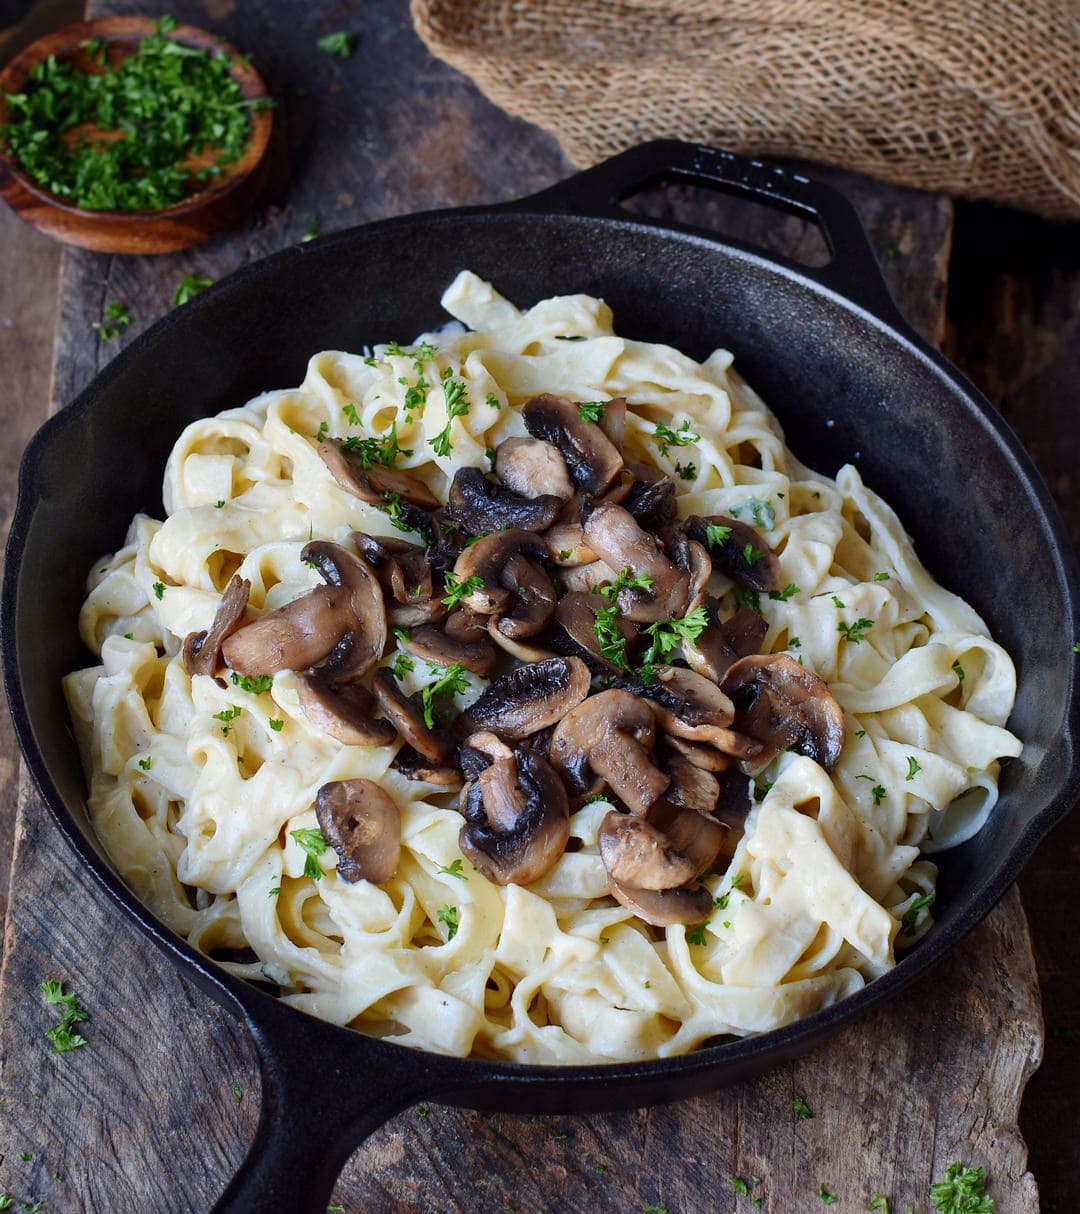 Fettuccine and mushrooms with white sauce in a black skillet